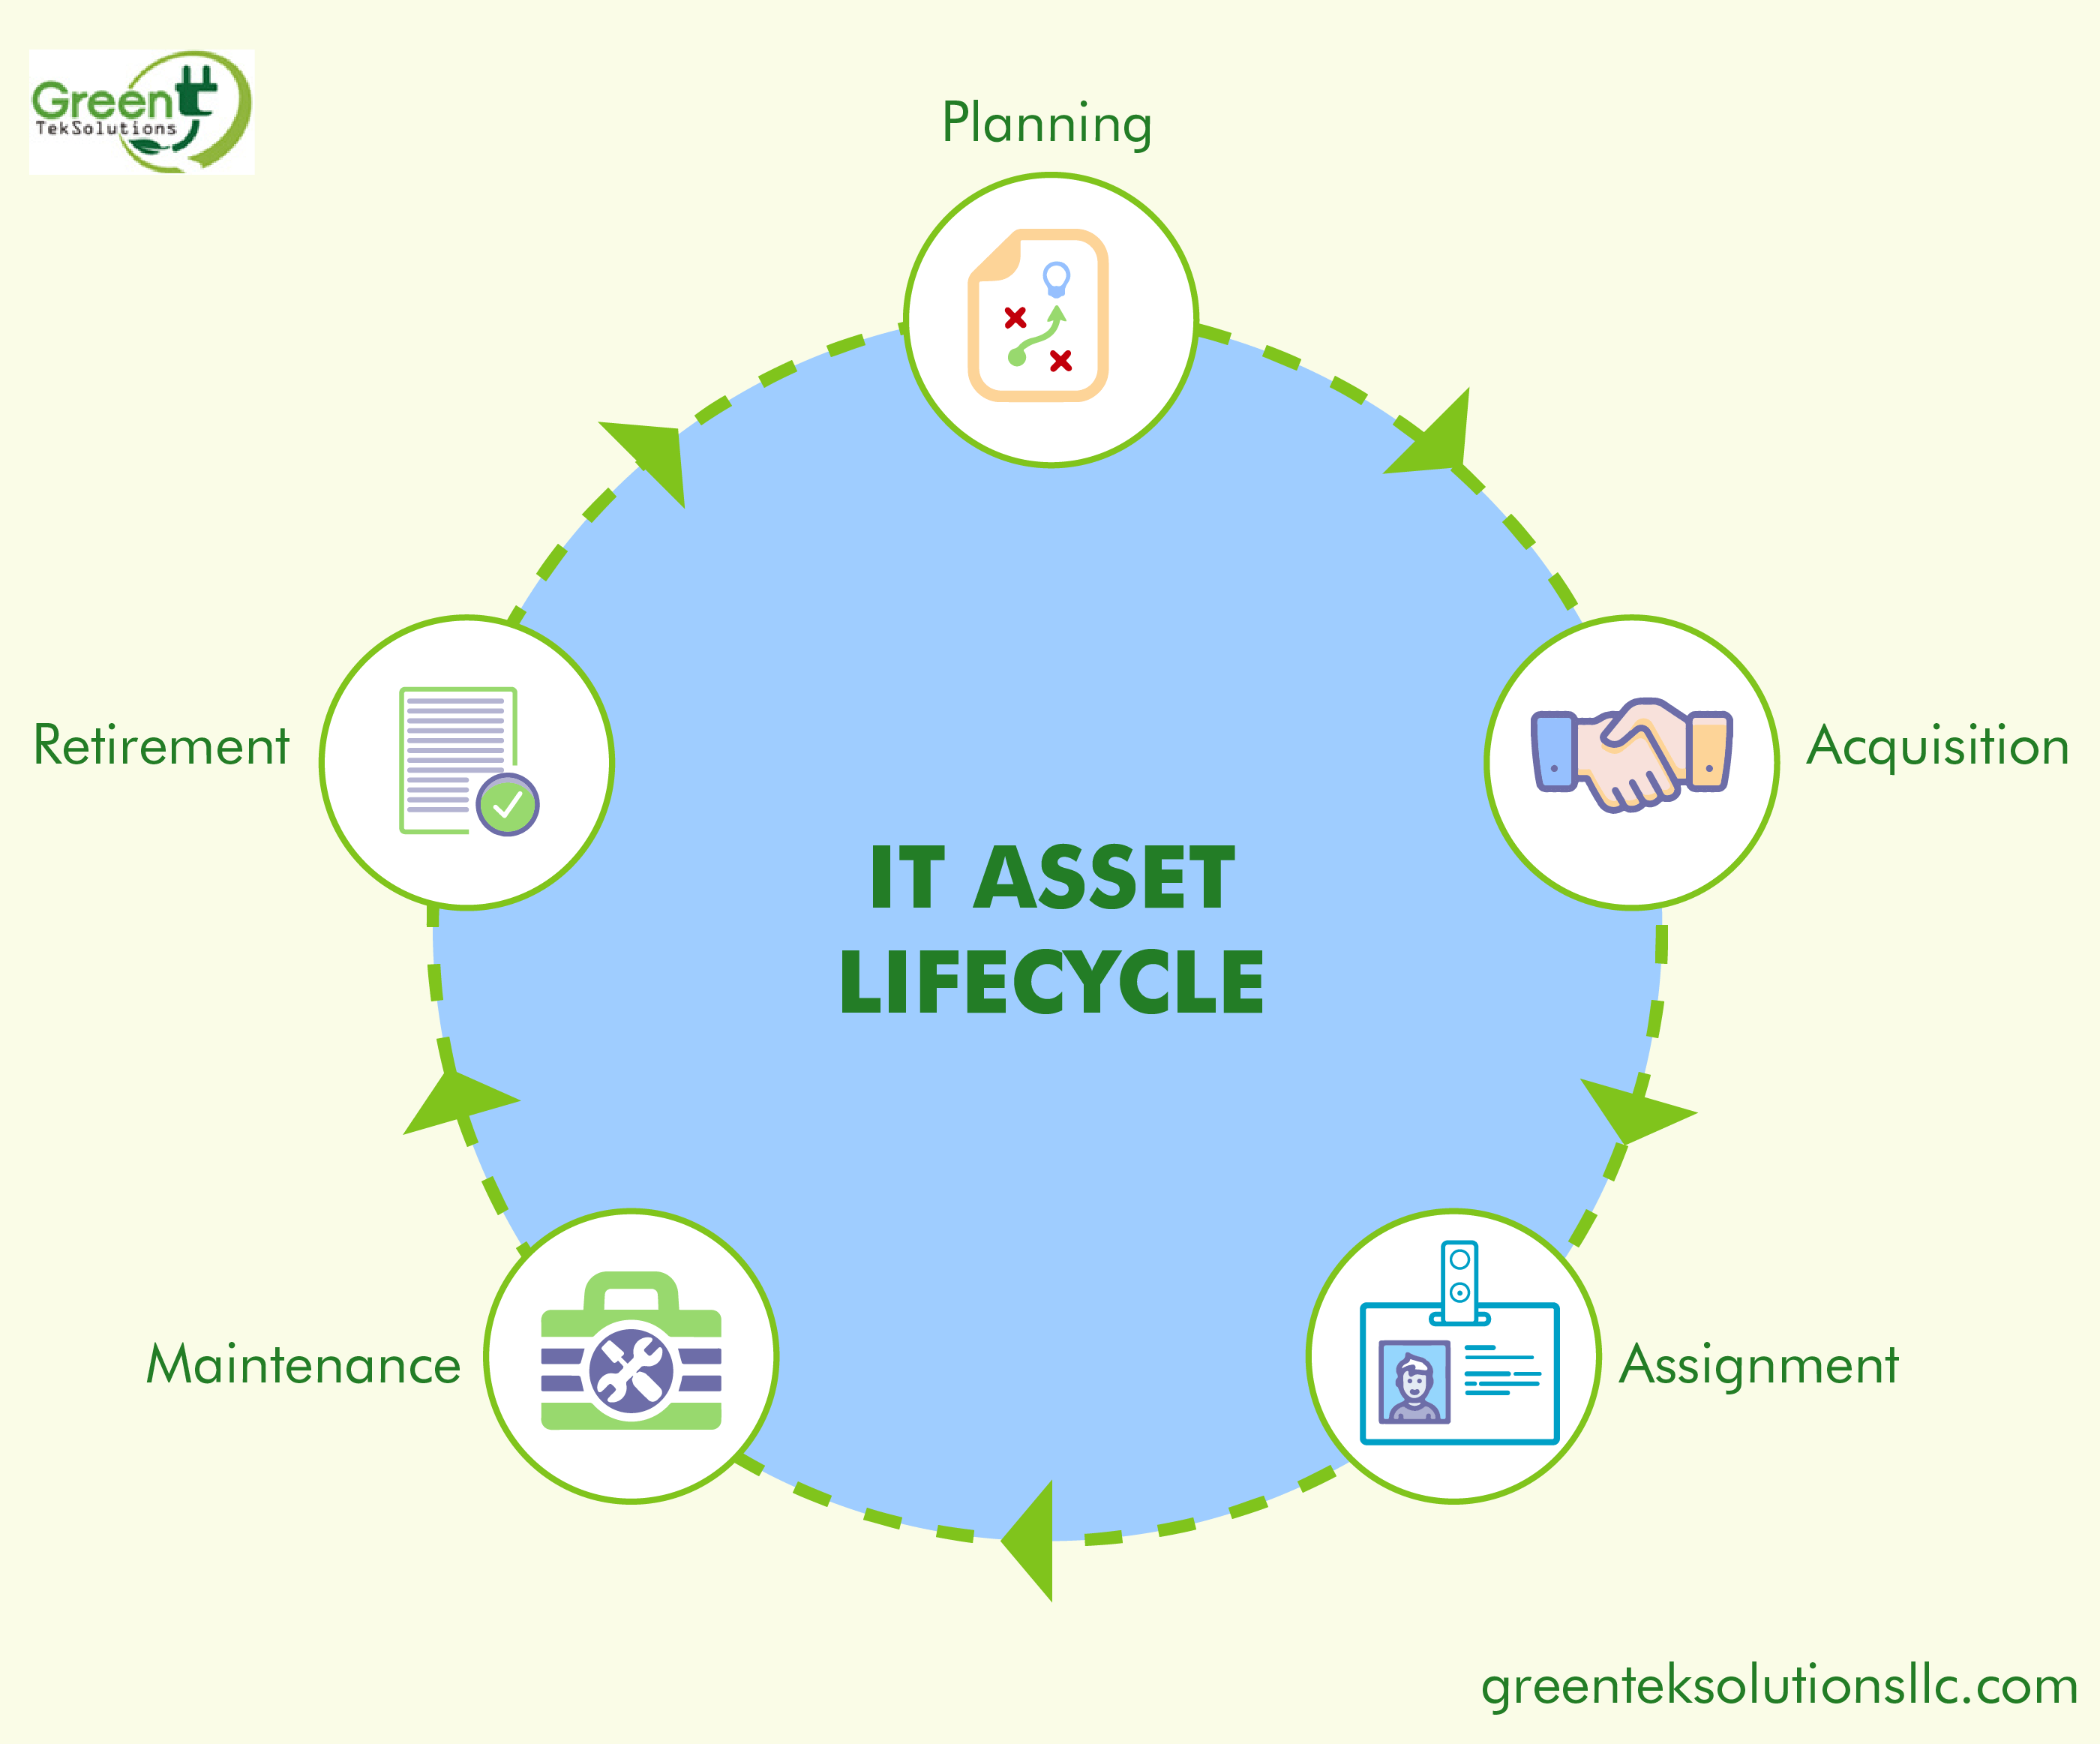 What is the life cycle of an IT asset?